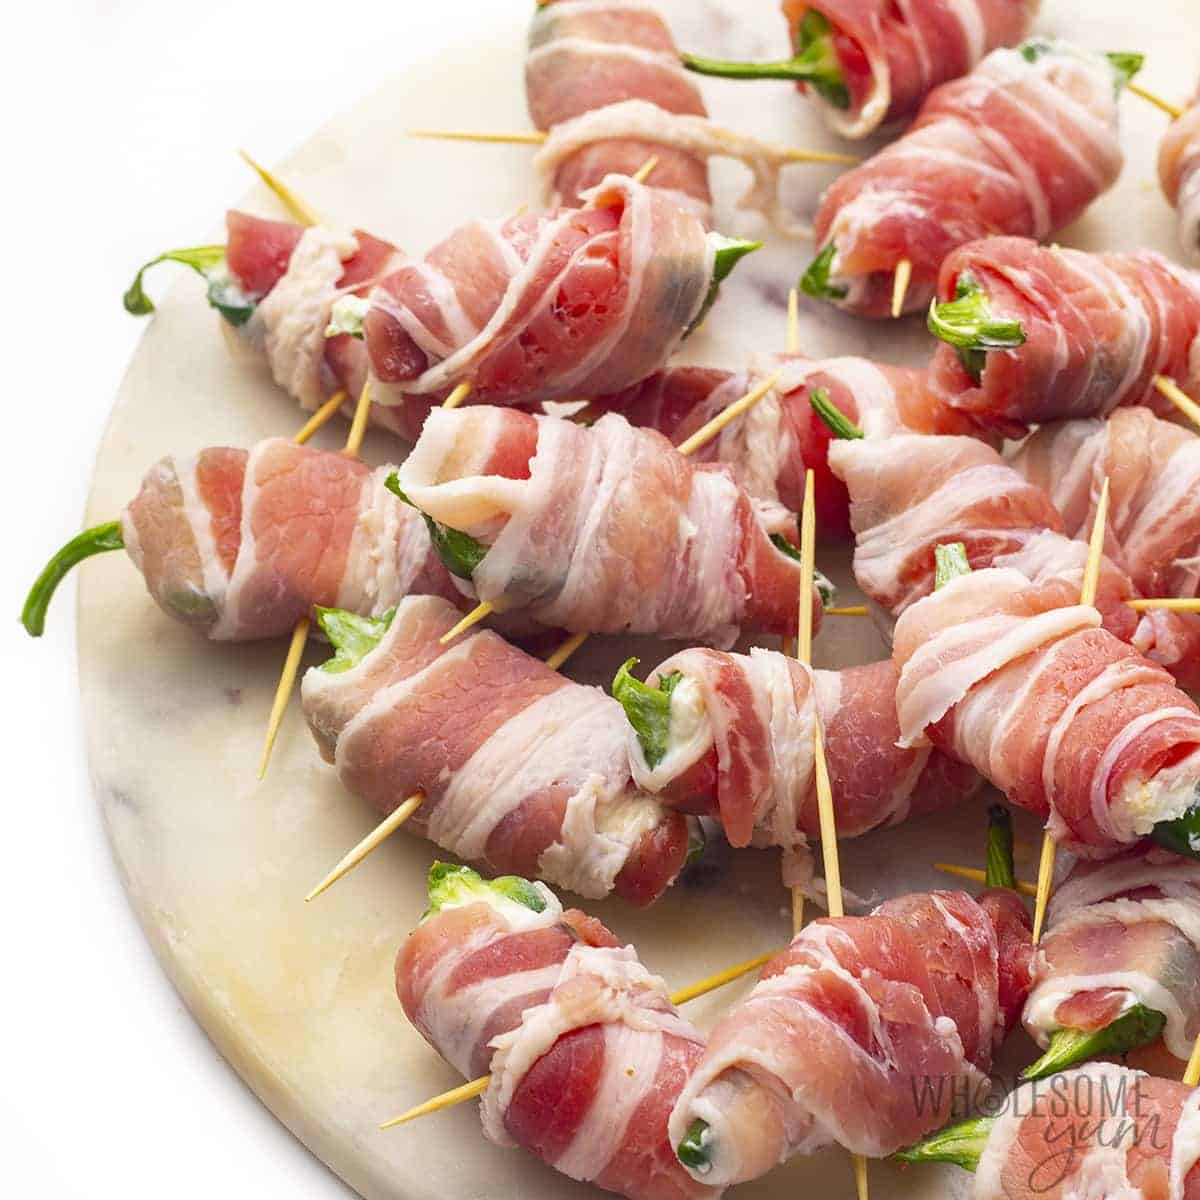 Jalapeno poppers wrapped in bacon